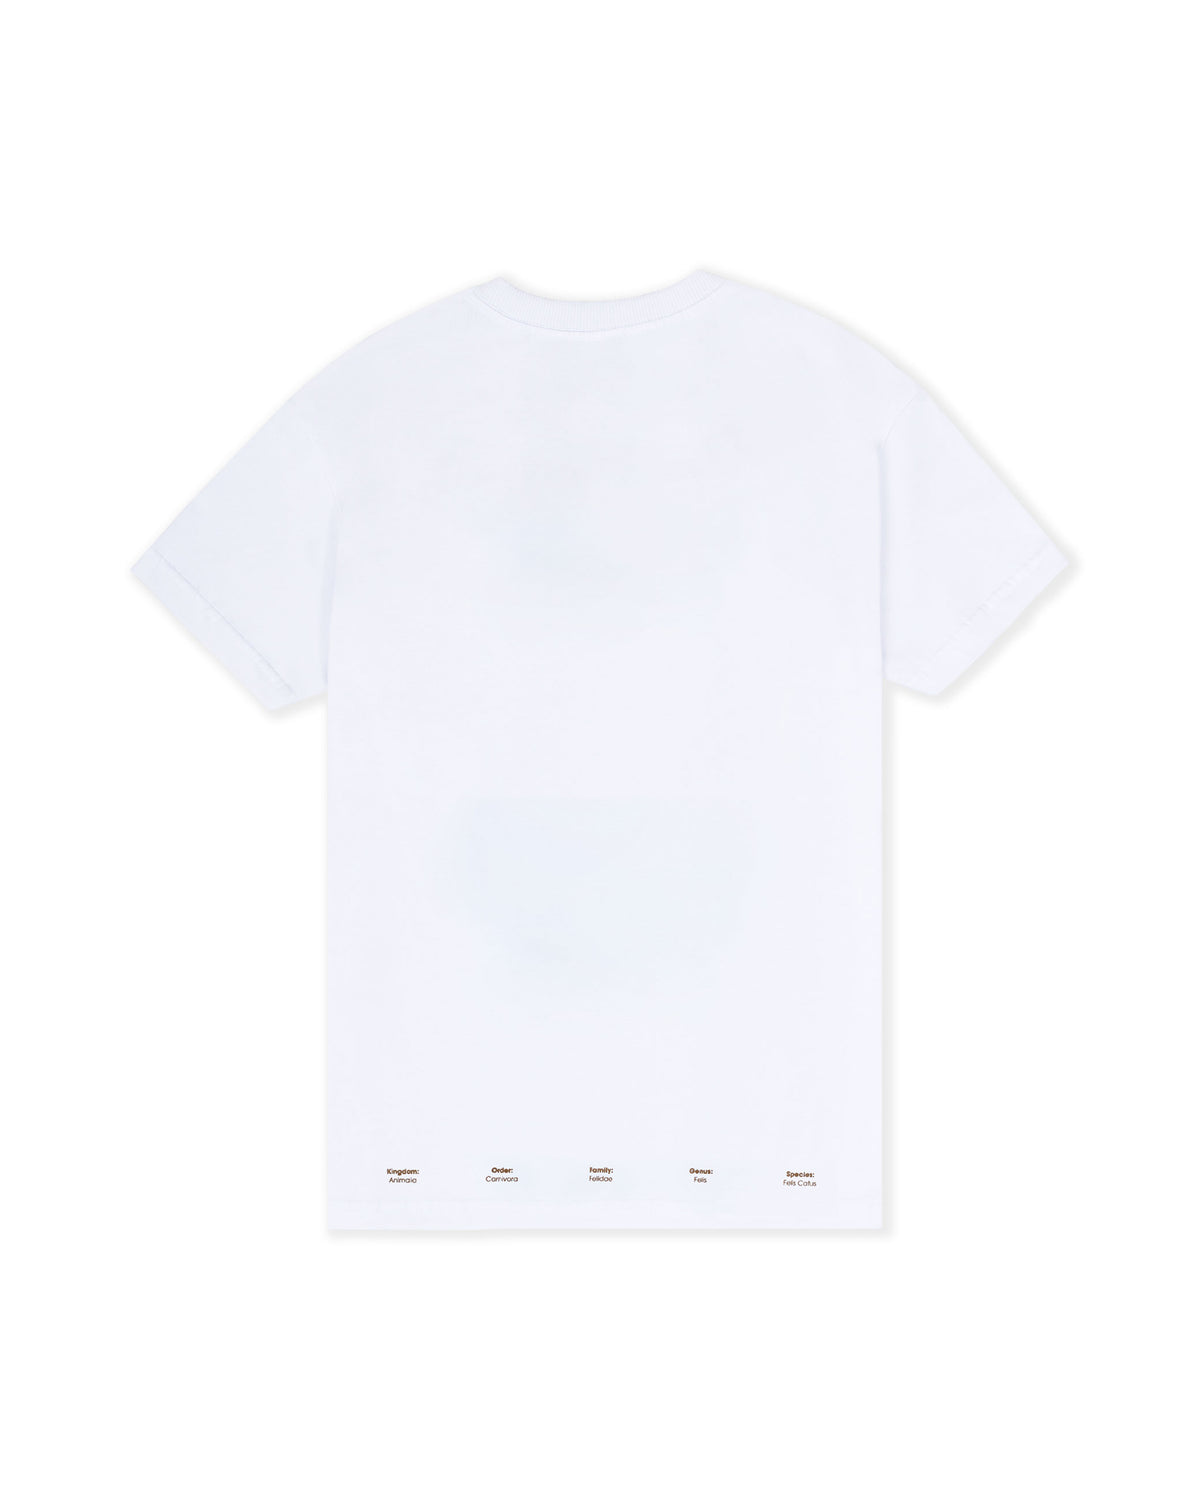 CAMISETA CLEVER PROWLERS  BLANCO